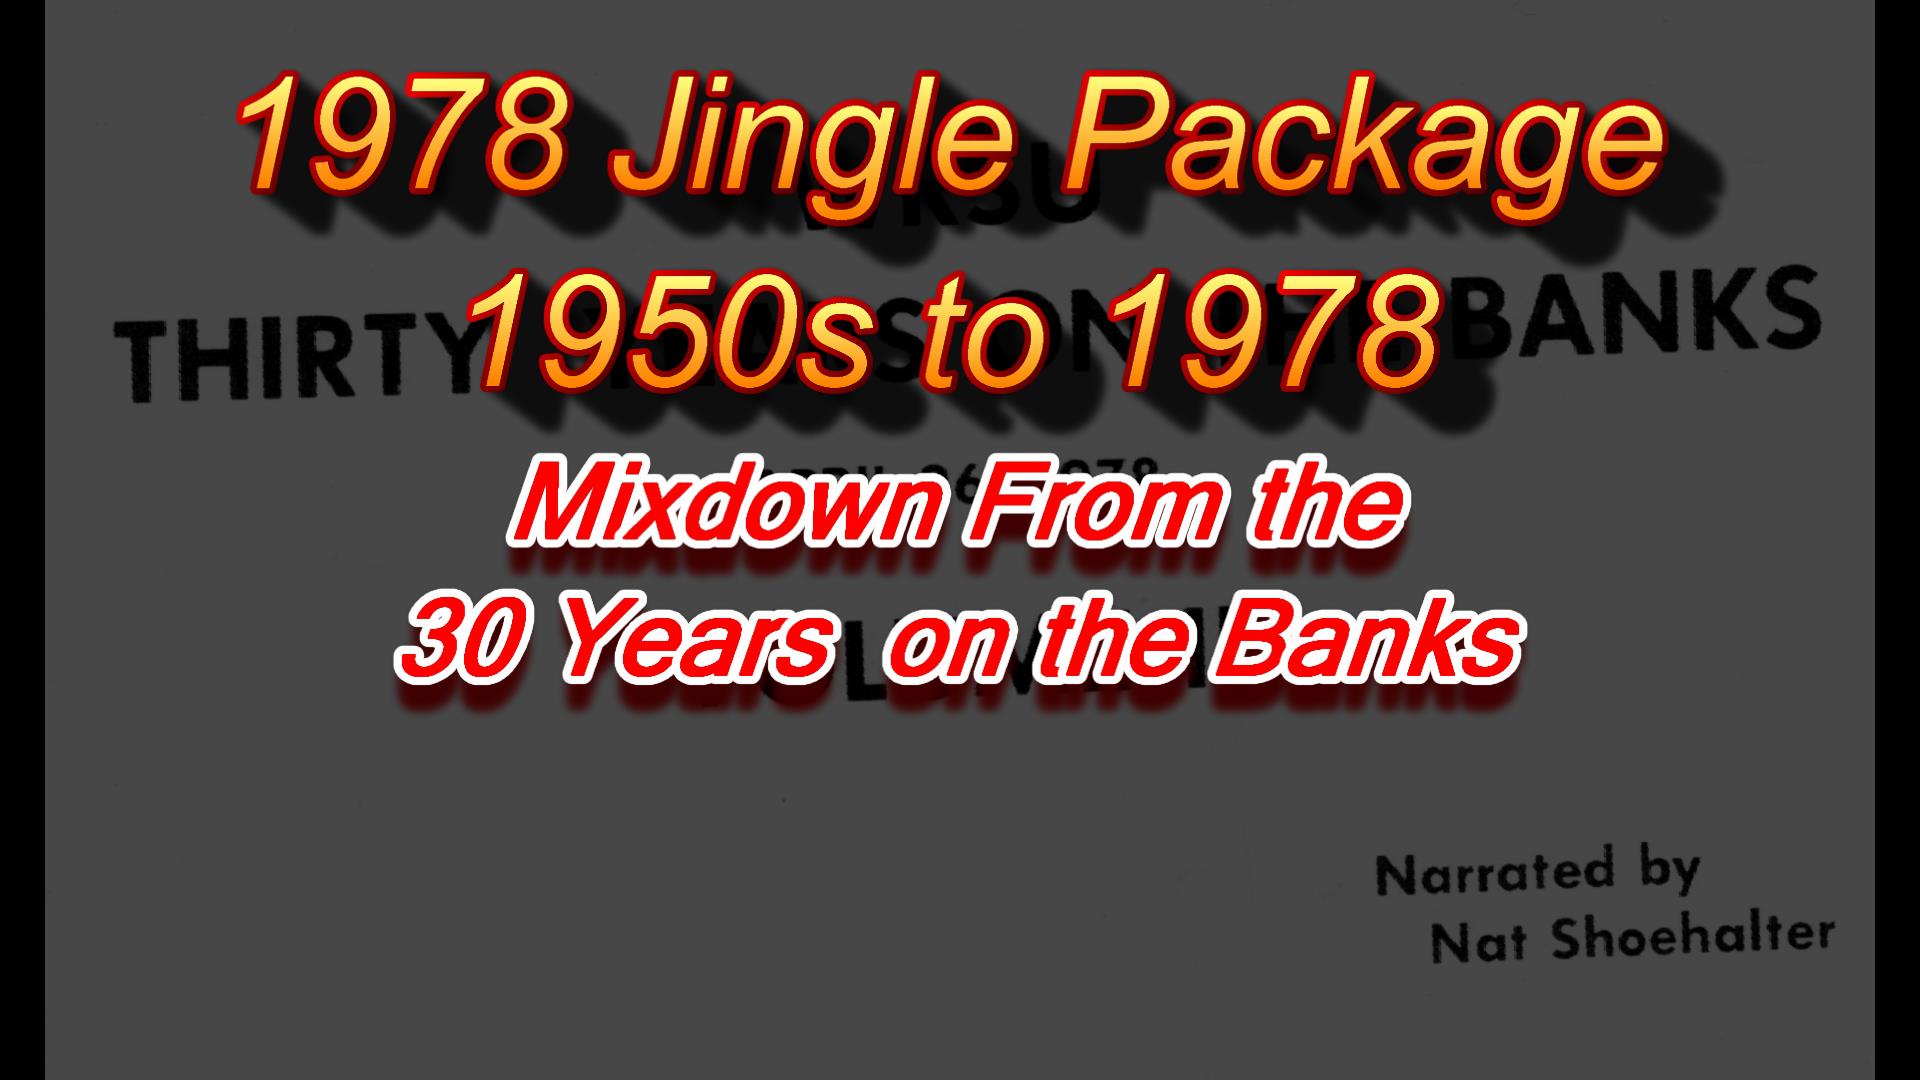 Jingle Package from 30 Years on the Banks